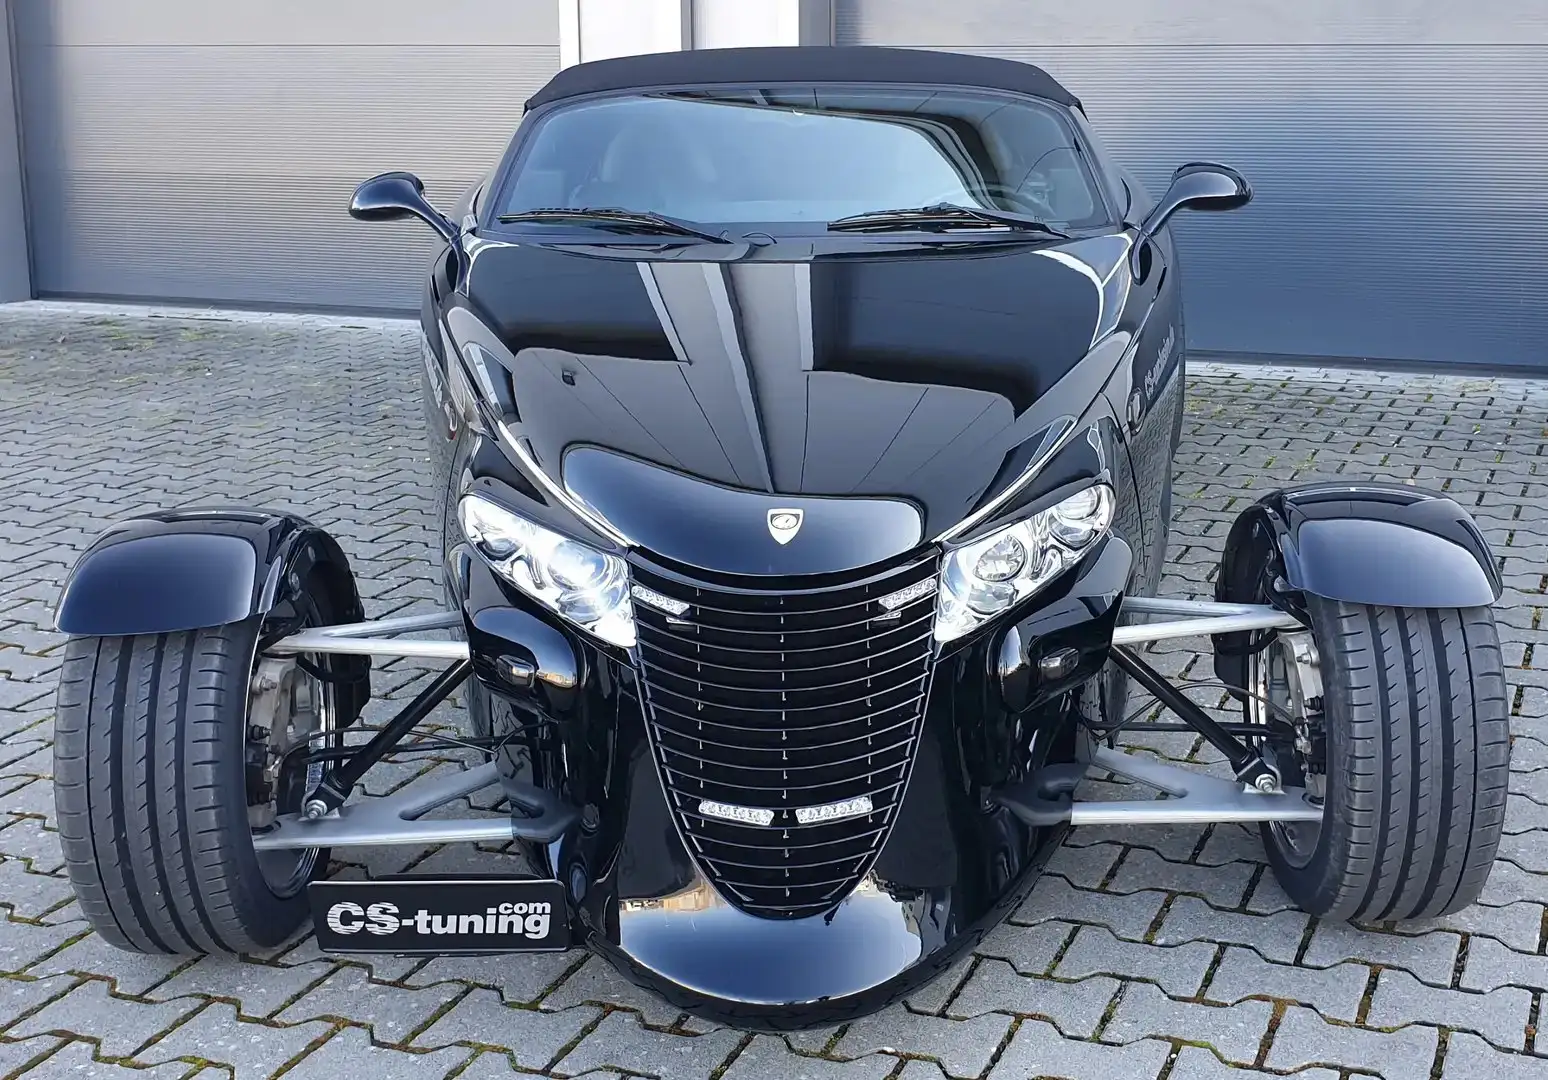 Plymouth Prowler Black - 2